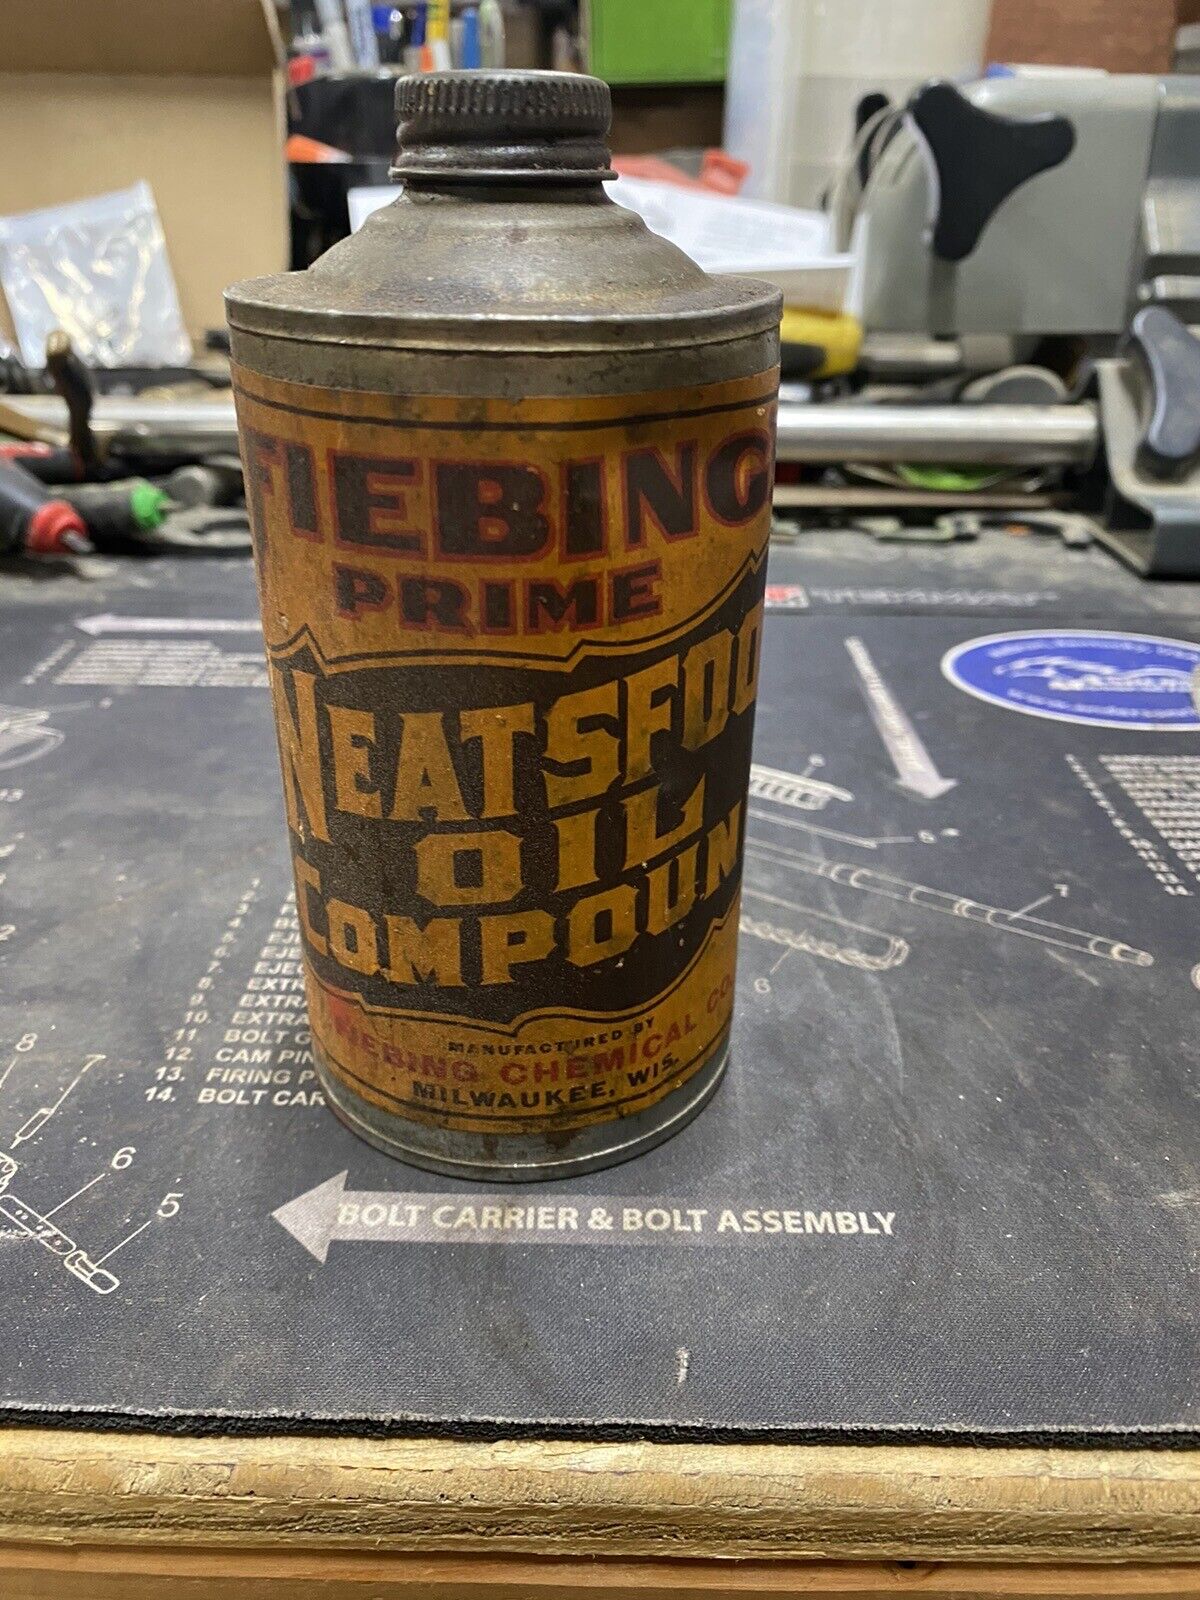 Vintage Fiebing’s Prime Neatsfoot Oil Softener Compound 1 Pint Can EMPTY Antique